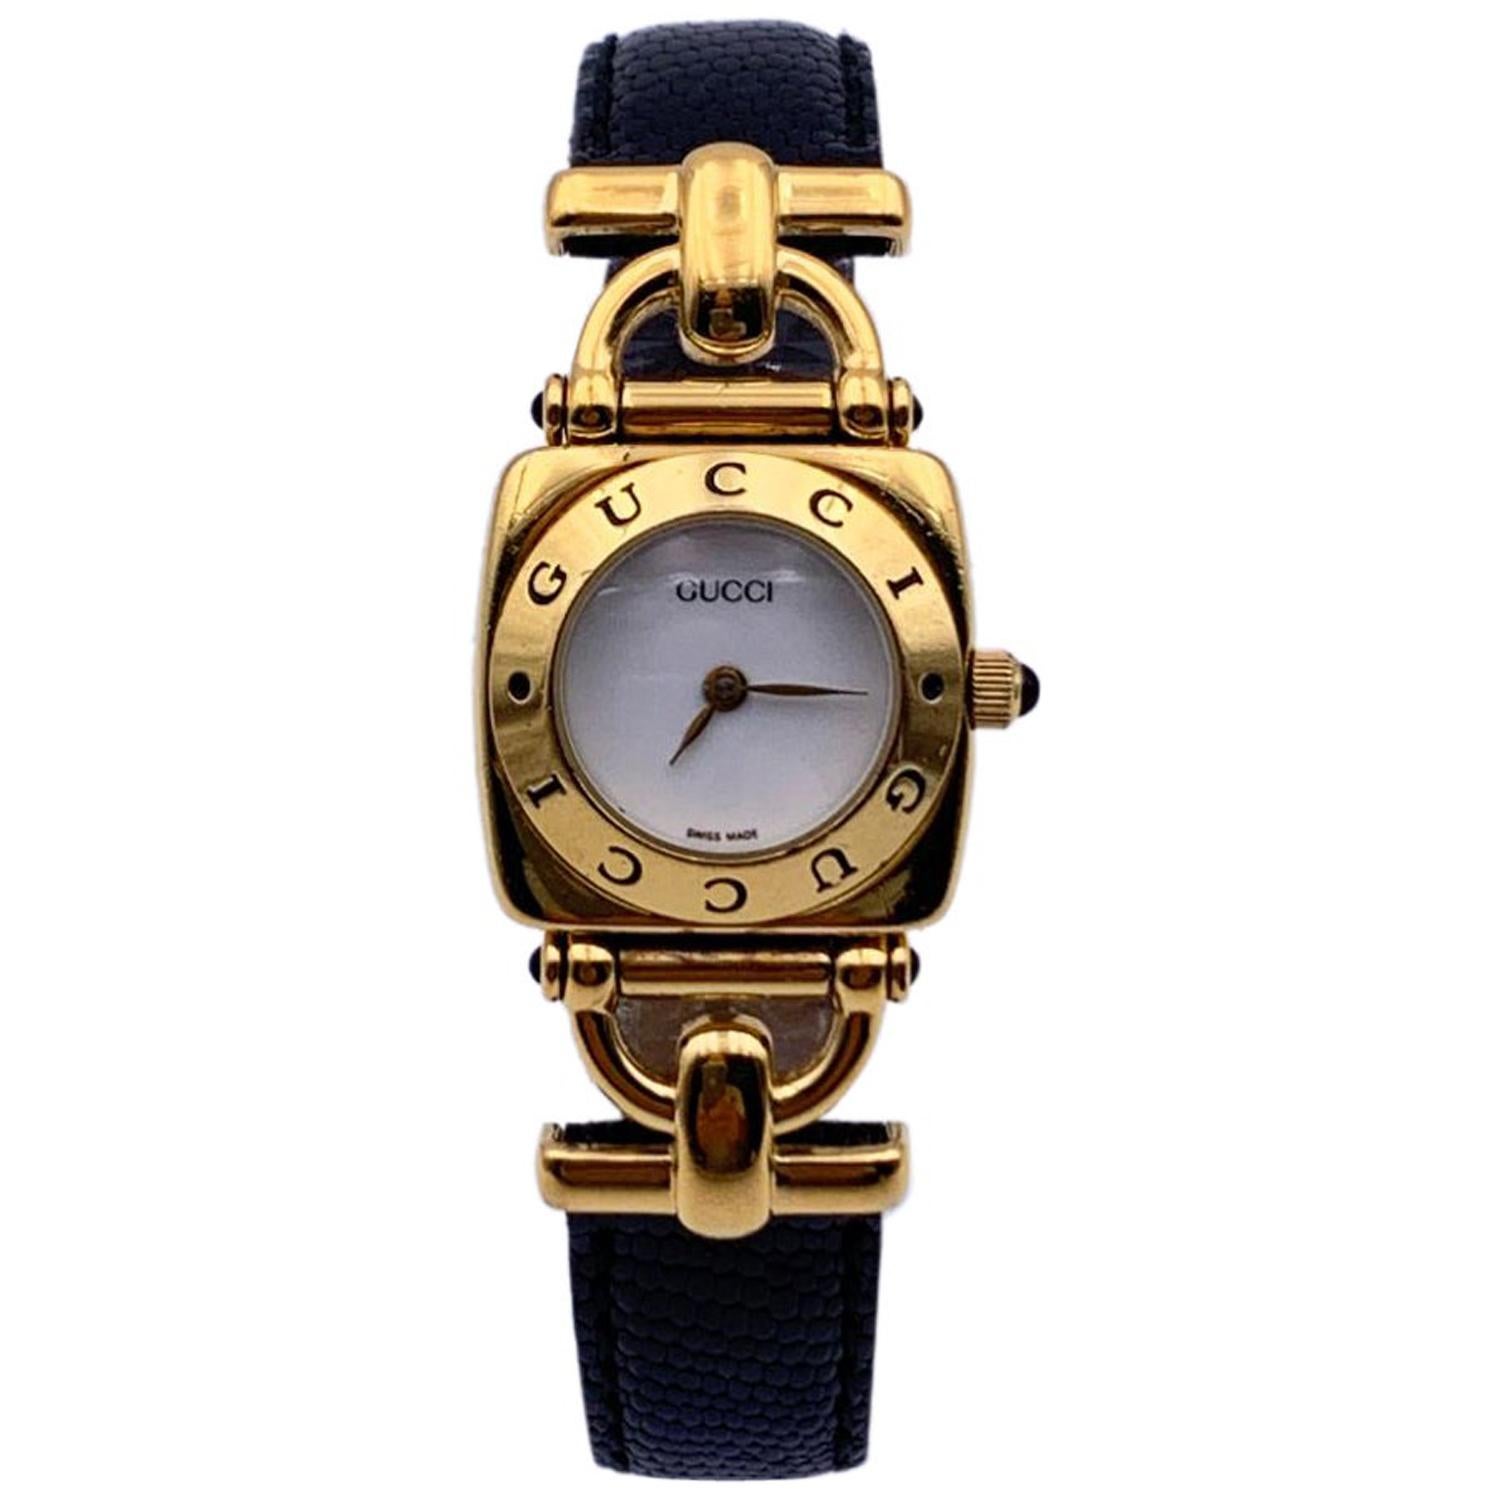 Gucci Vintage Gold Plated Mod 6300 L Wrist Watch White Dial